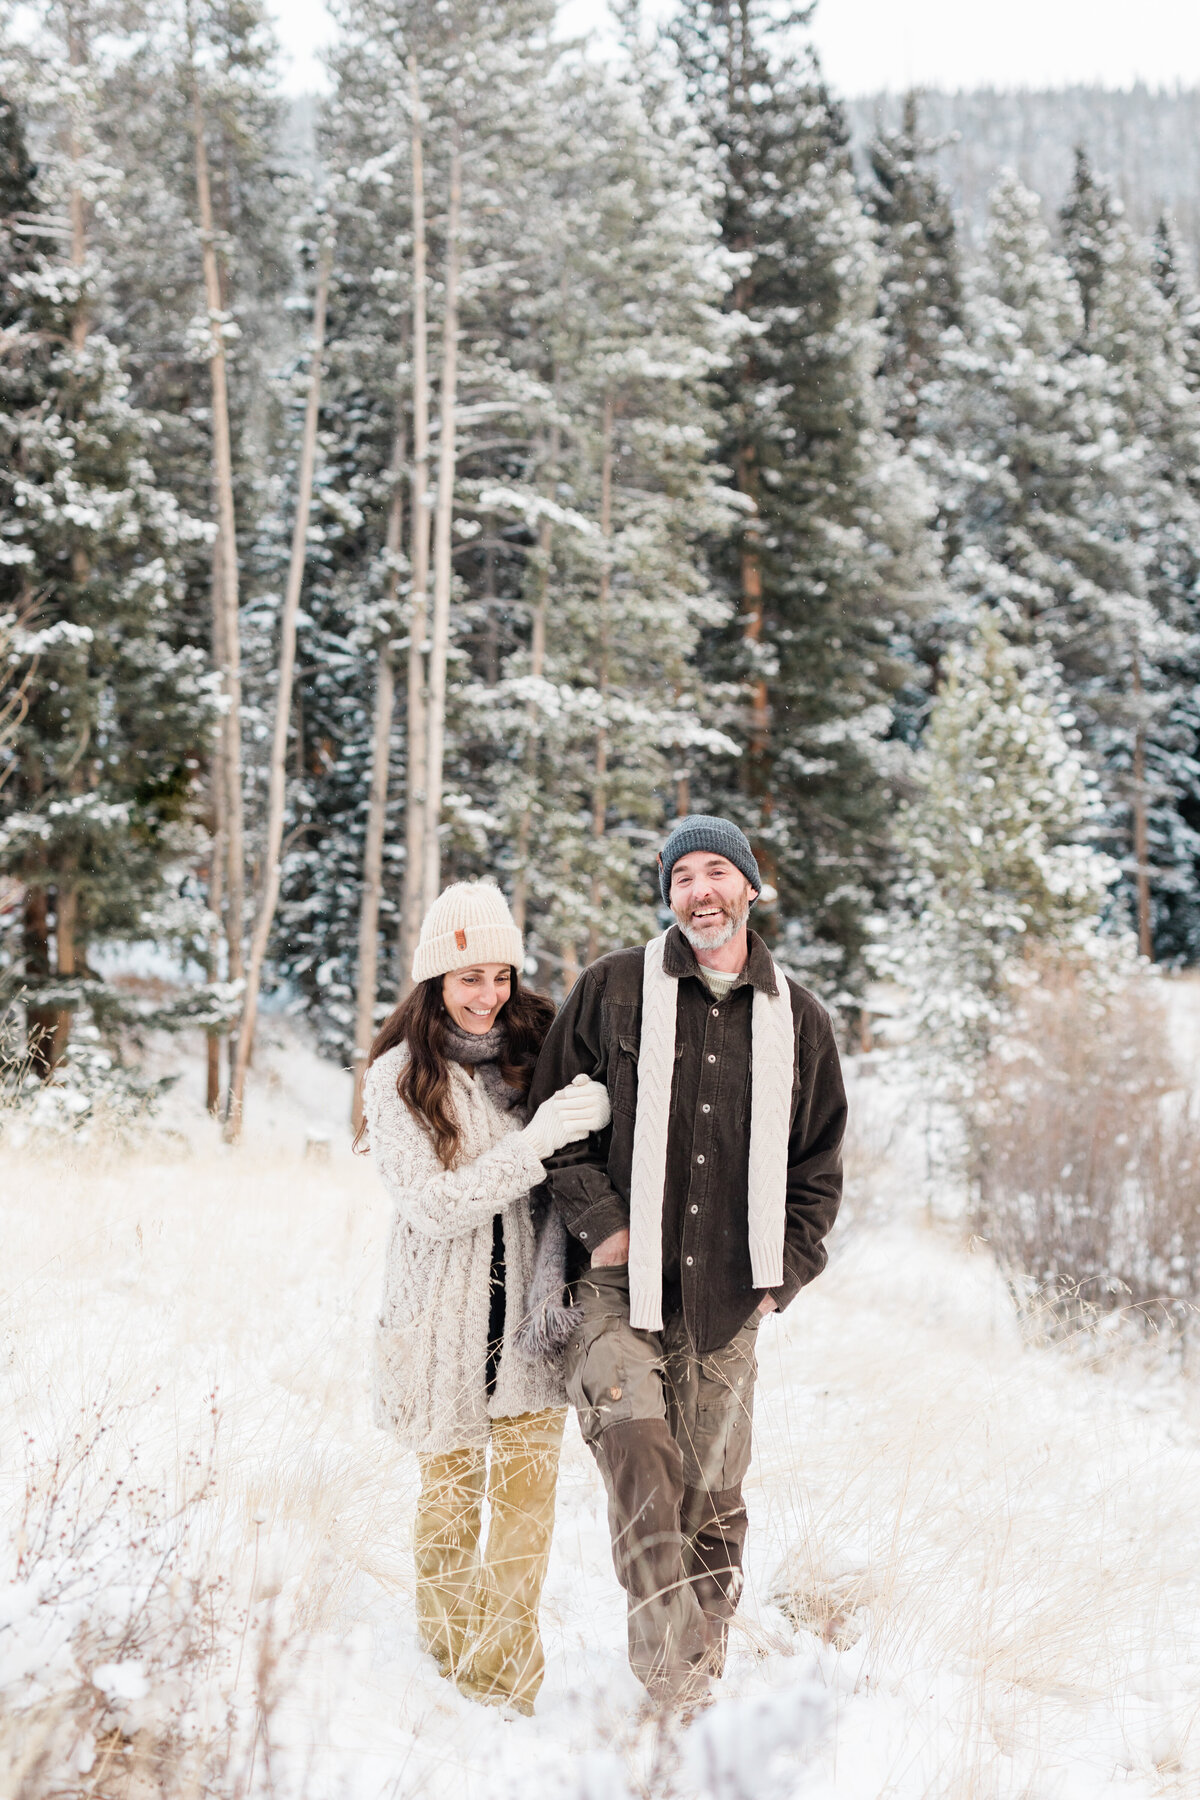 A husband and wife walk together in a winter wonderland of pine trees, brush, and lots of snow